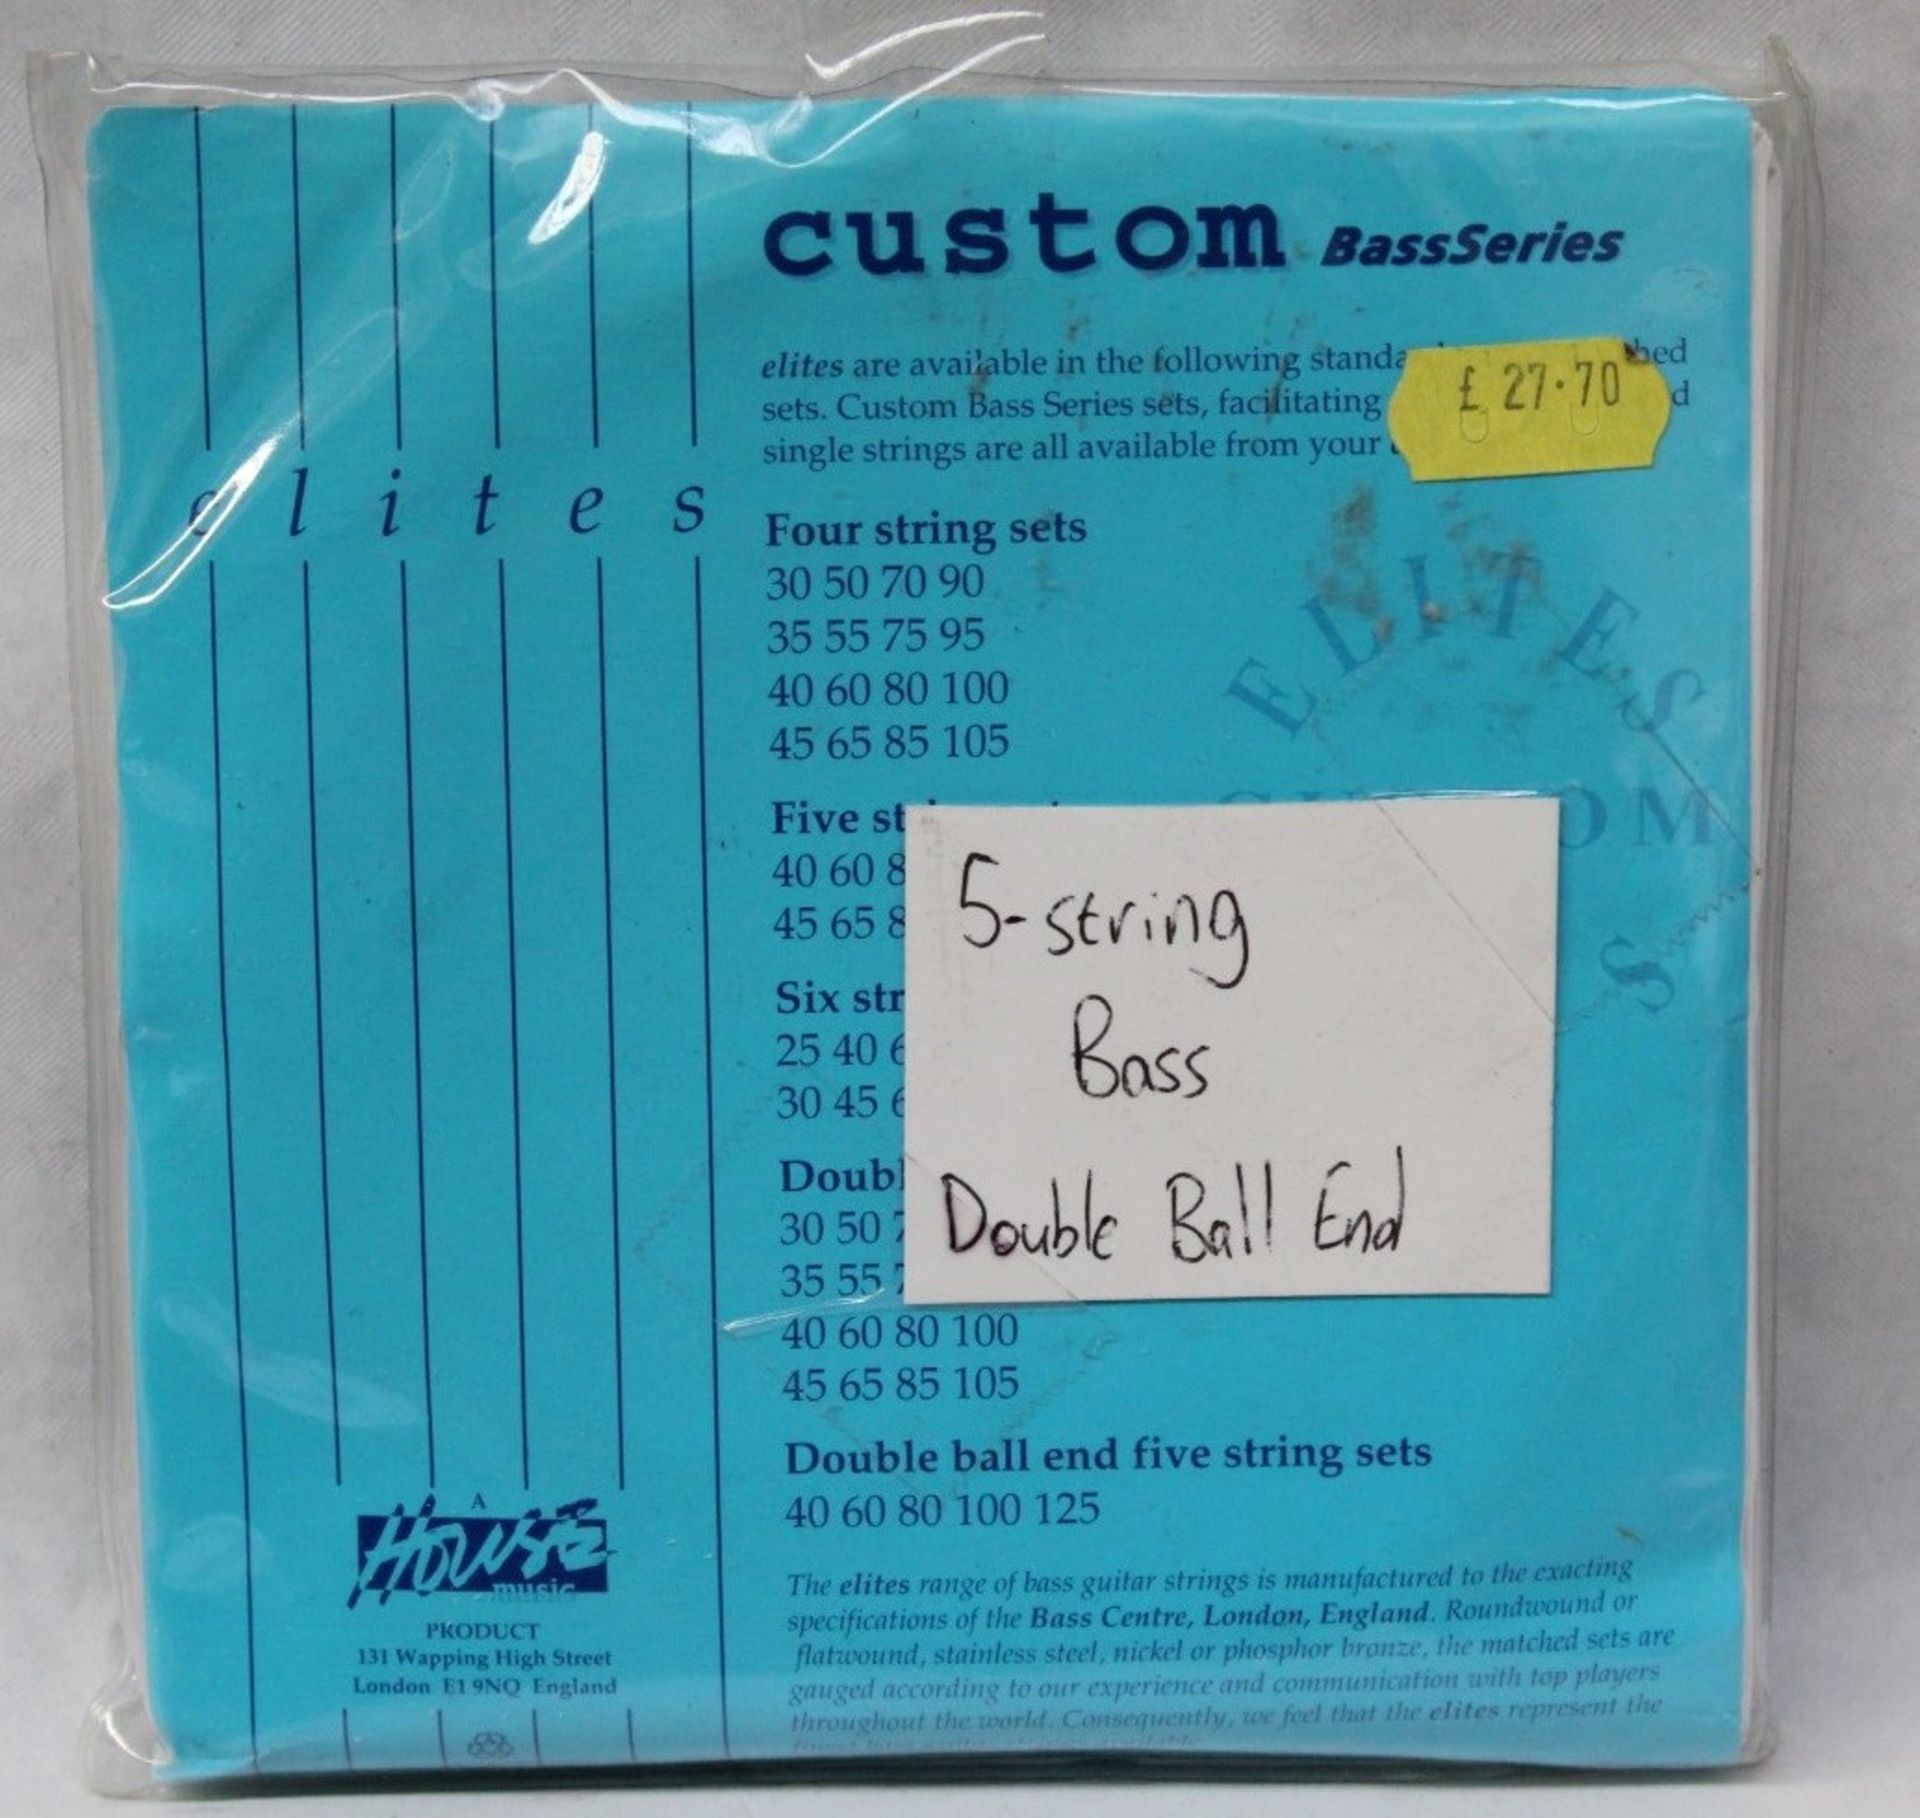 1 x Set of Elites 5 String Double Ball End Bass Strings - Brand New Stock - CL020 - Ref Pro213 - - Image 2 of 3